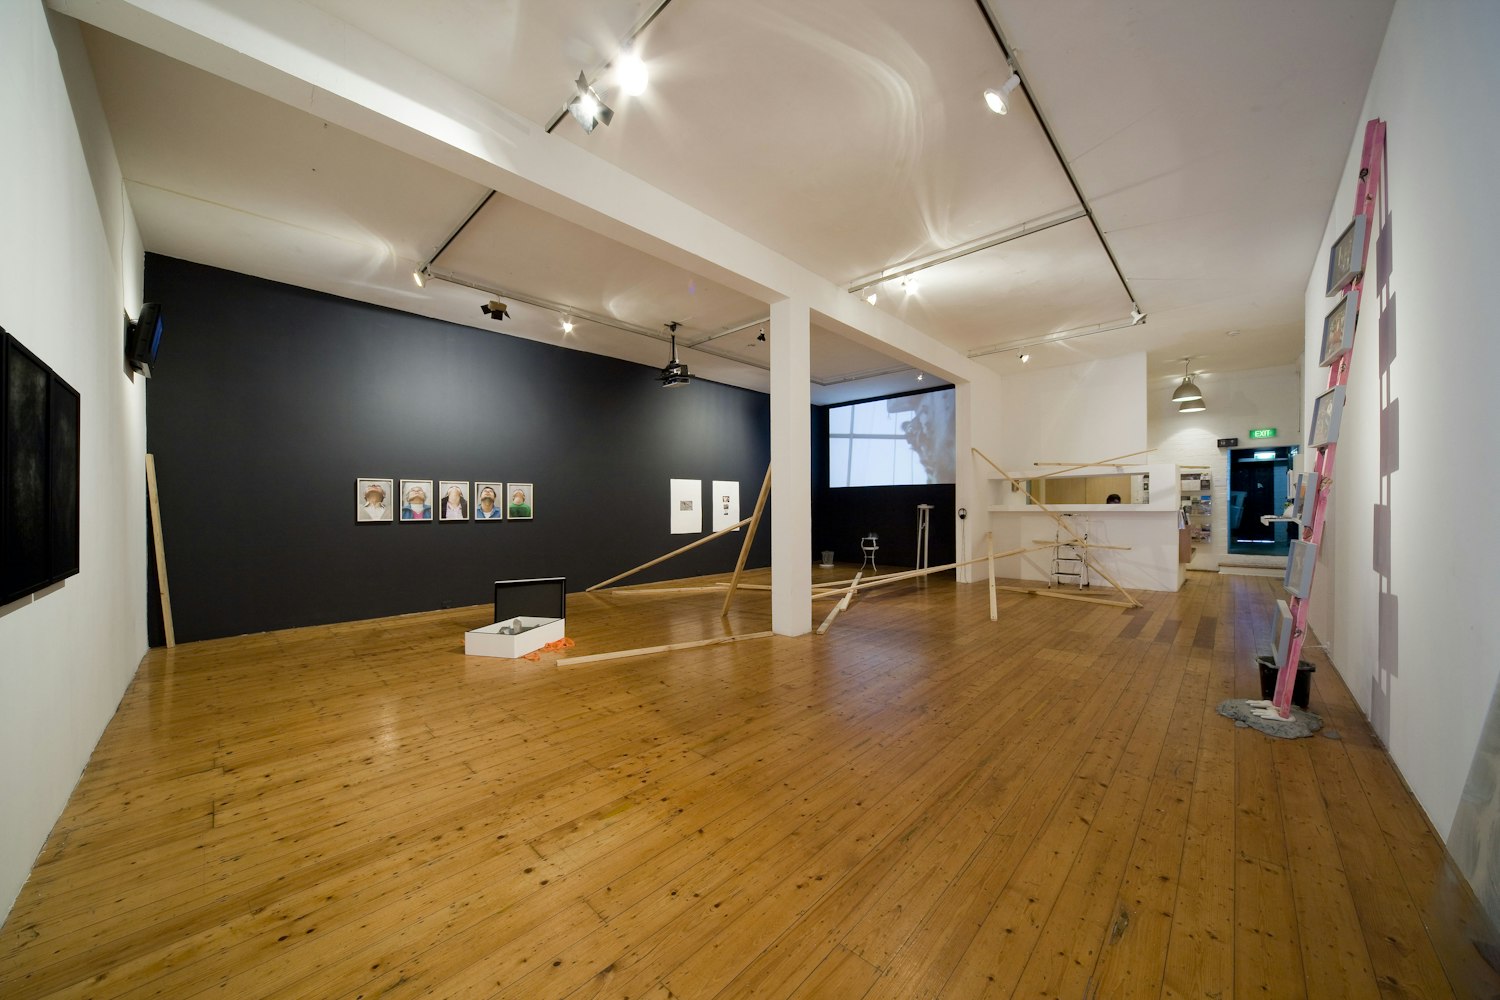 Installation view of 'Gertrude Studios 2008' at 200 Gertrude St.